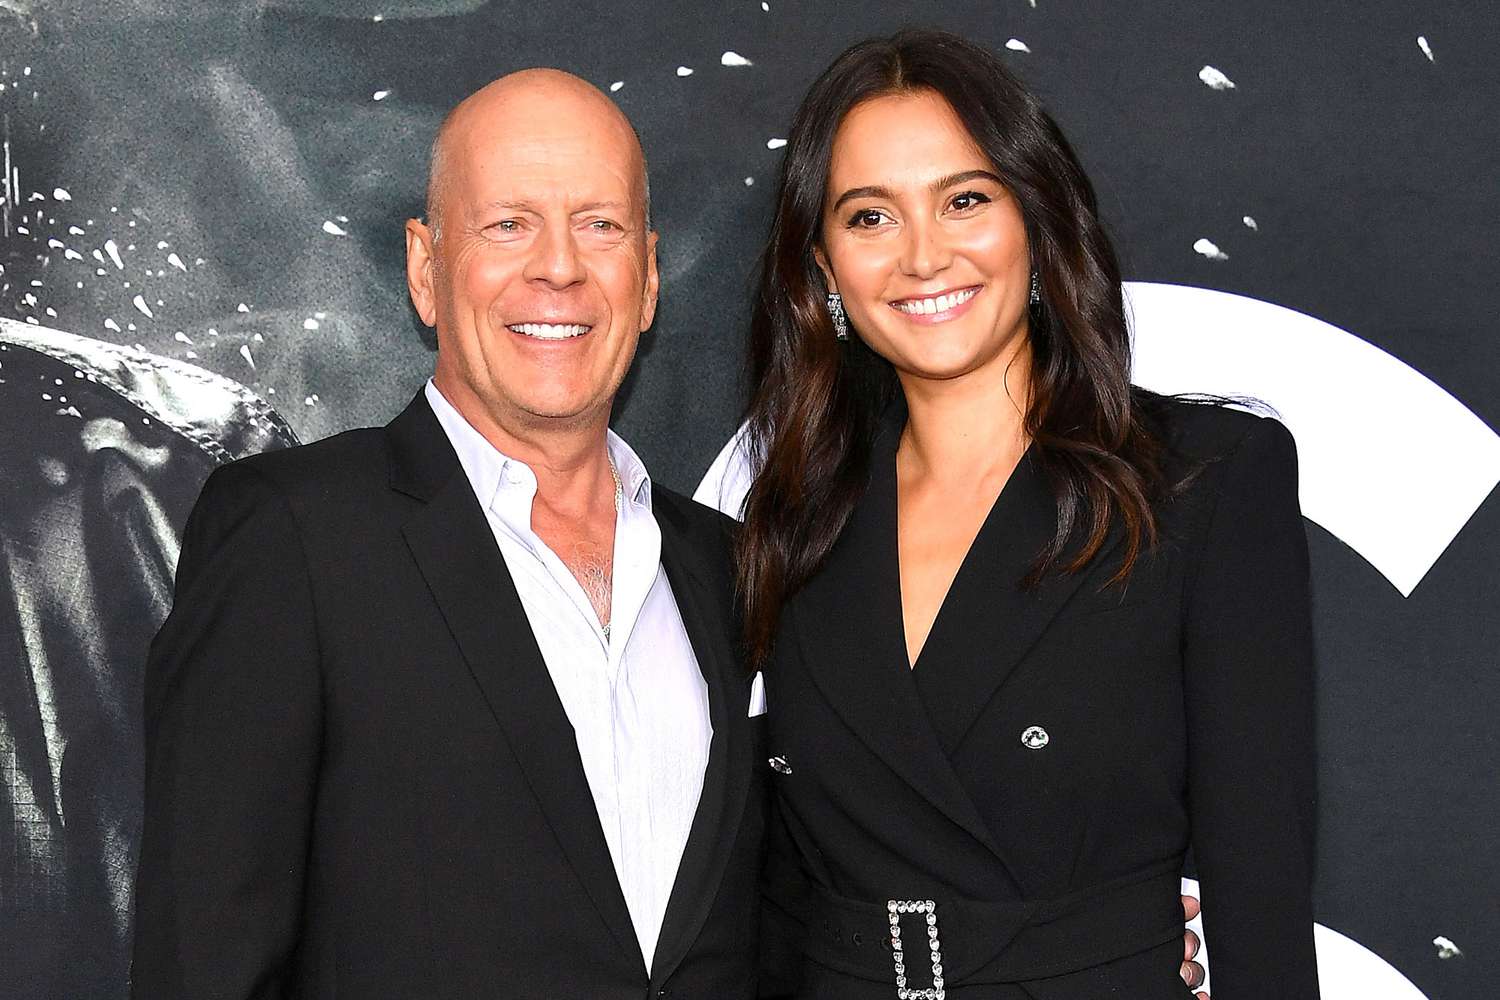 Bruce Willis' wife shares sweet vow renewal video amid actor's dementia diagnosis